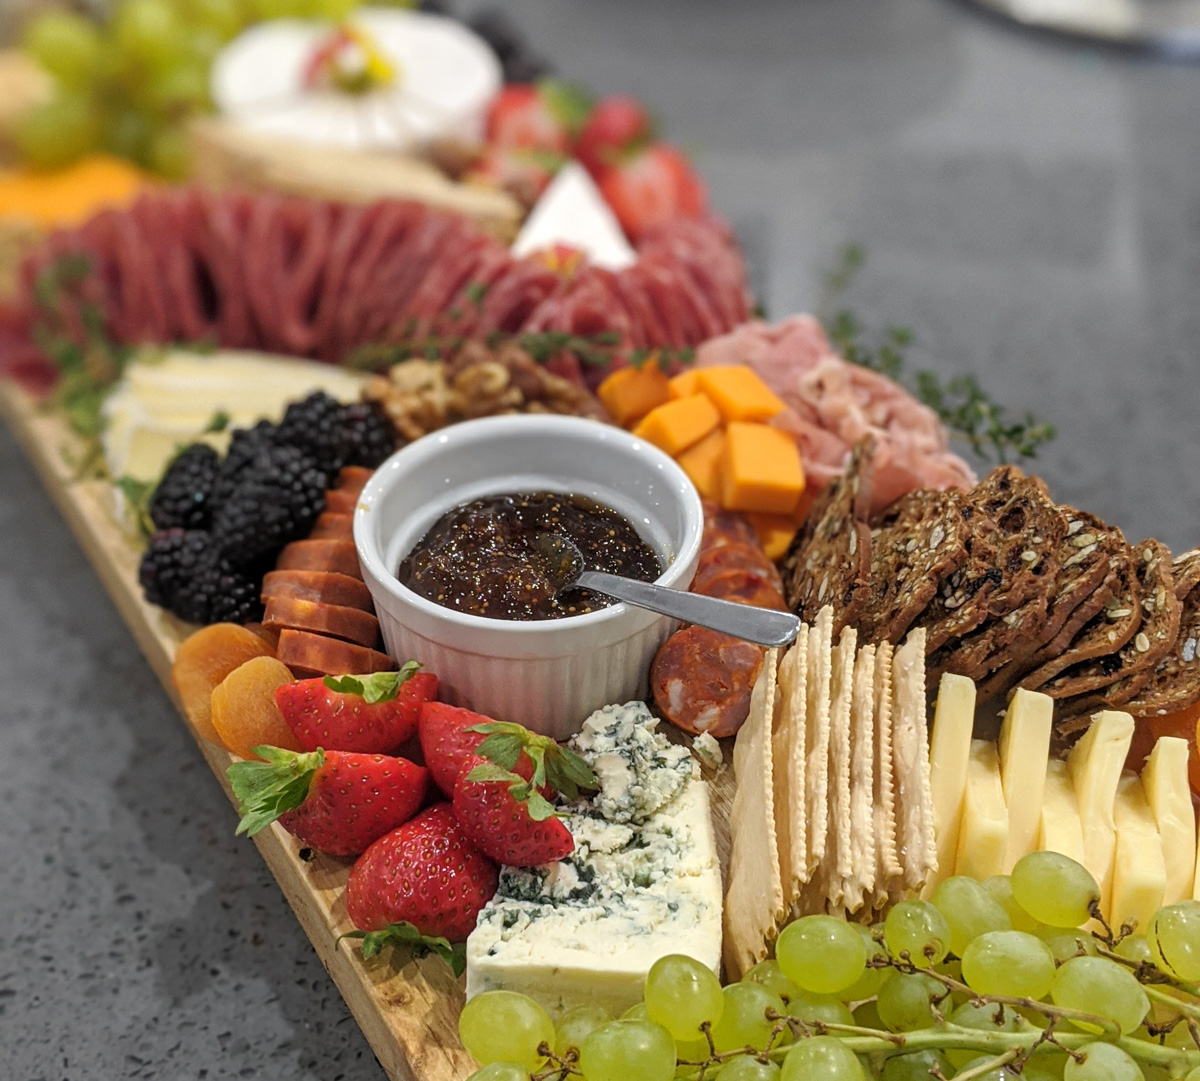 The Art of Building Your Own Cheese and Charcuterie Board at Home